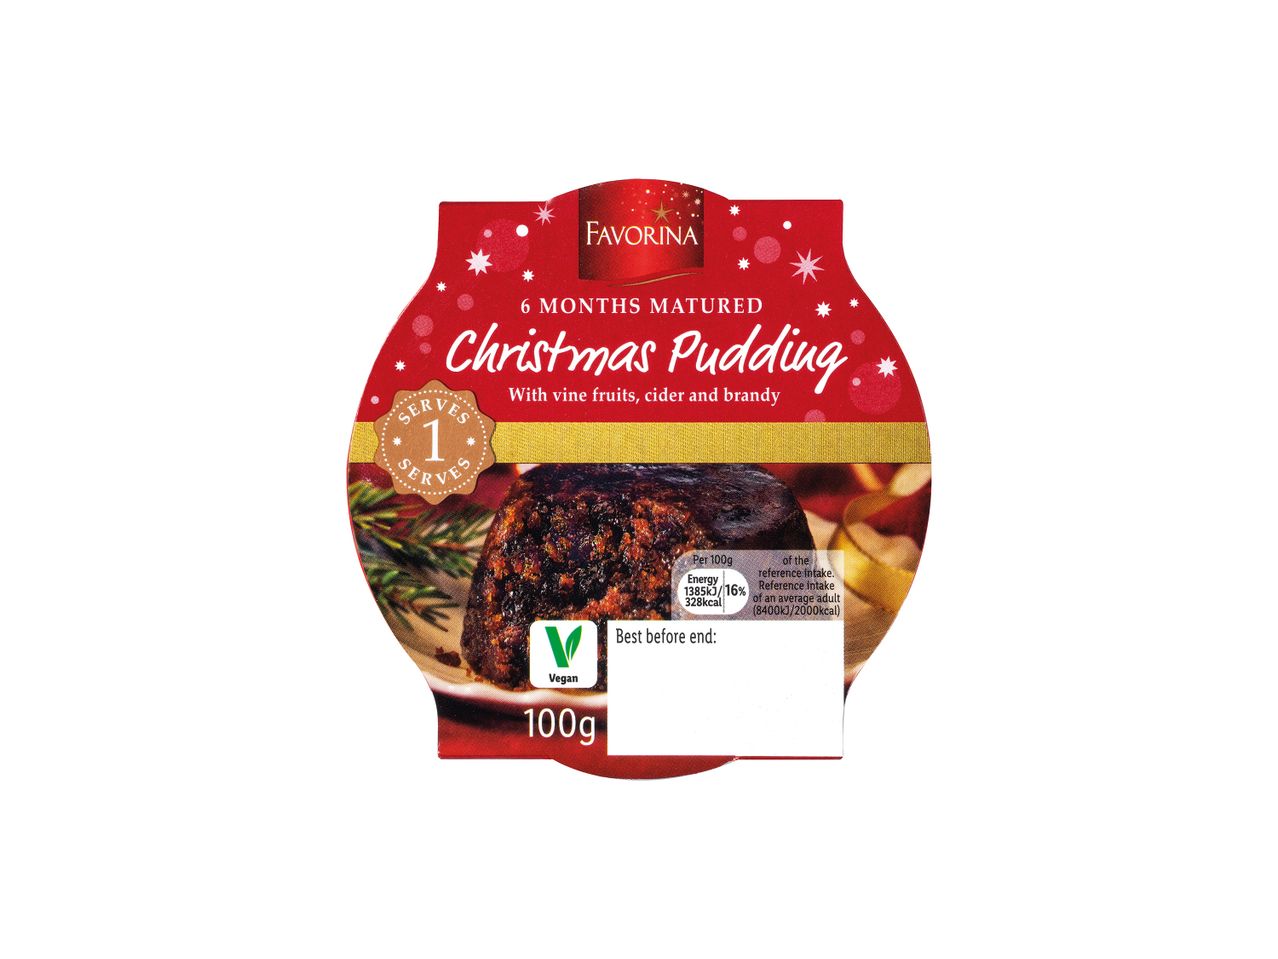 Go to full screen view: Favorina 6 Month Matured Mini Christmas Pudding - Image 1